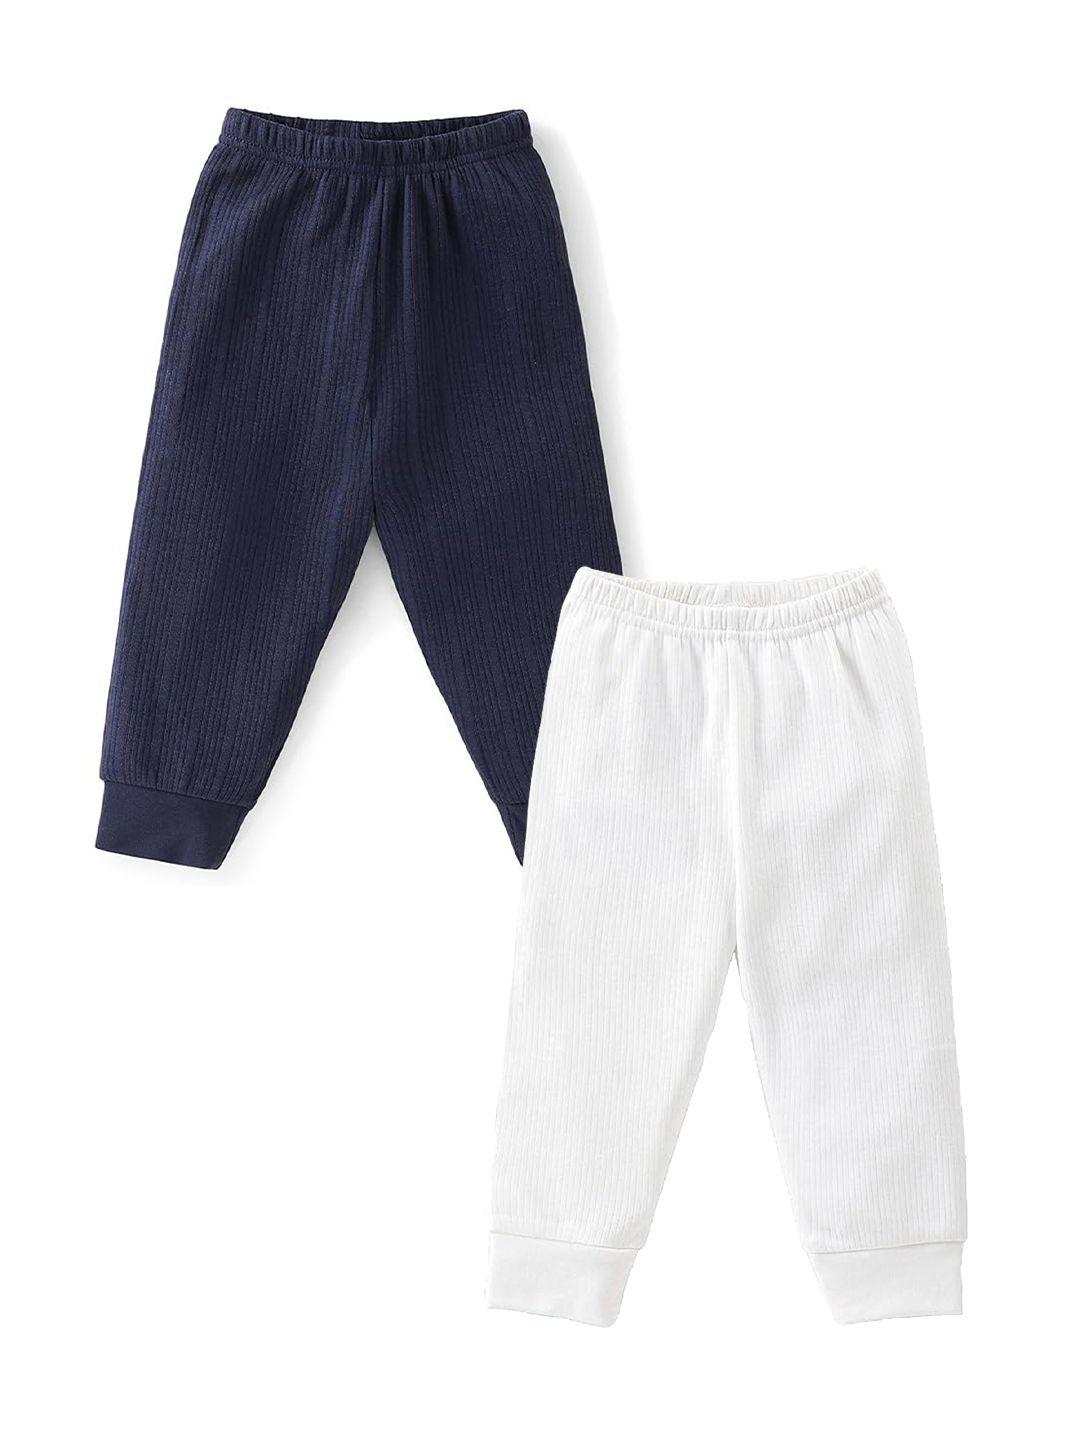 baesd kids pack of 2 stay warm cotton thermal bottoms